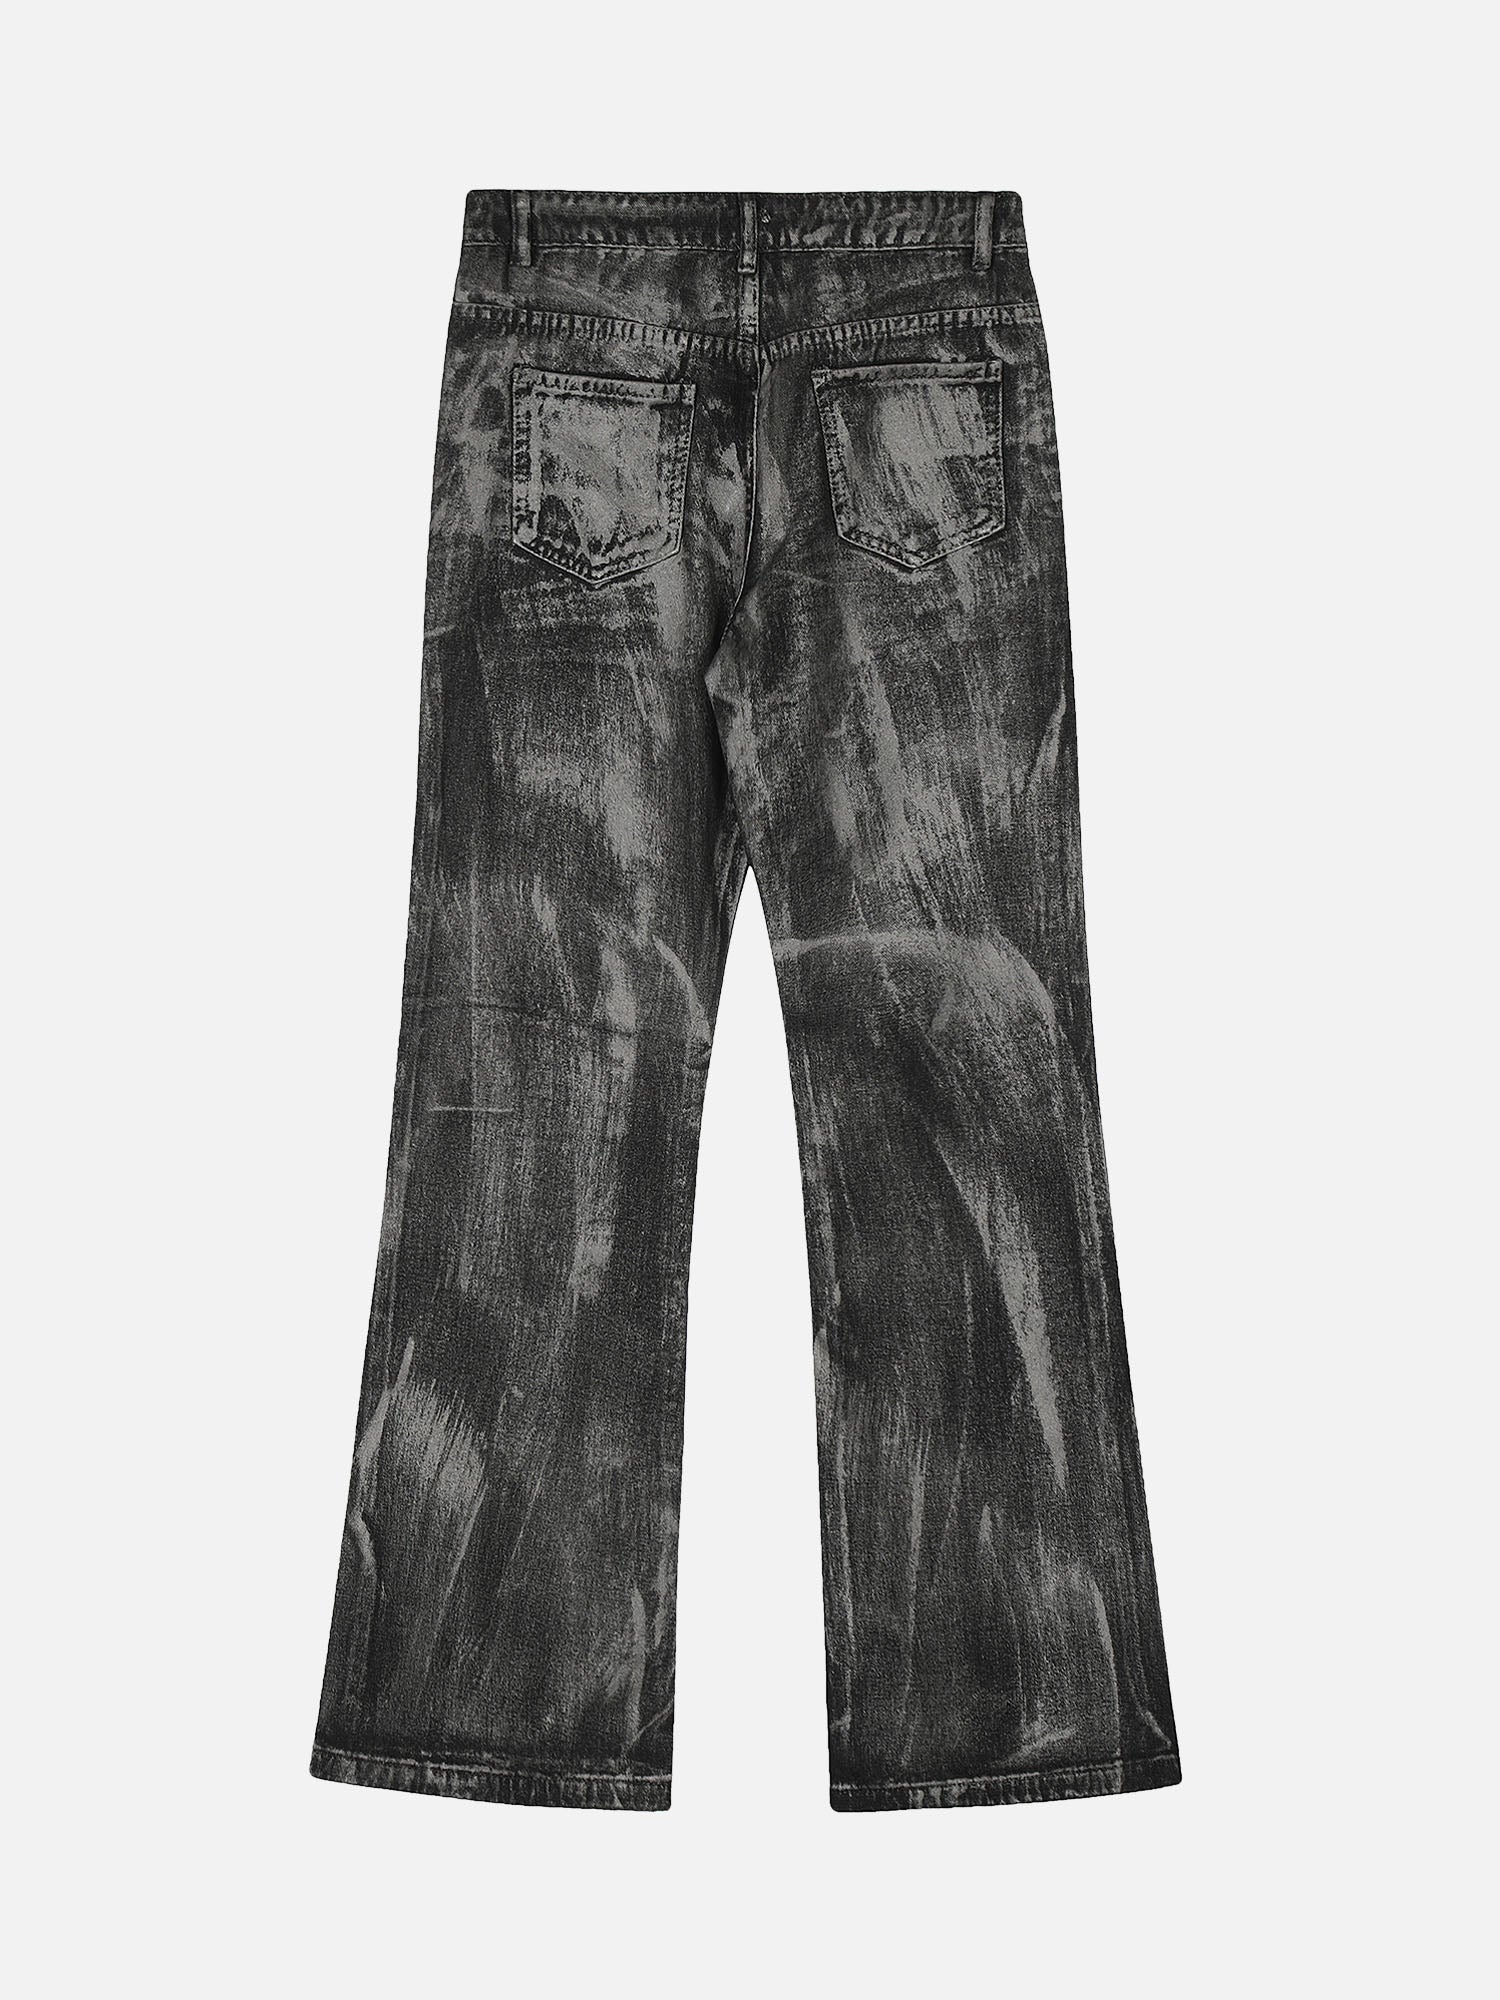 Thesupermade Heavy Washed Ink Splash Graffiti Hip-Hop Jeans